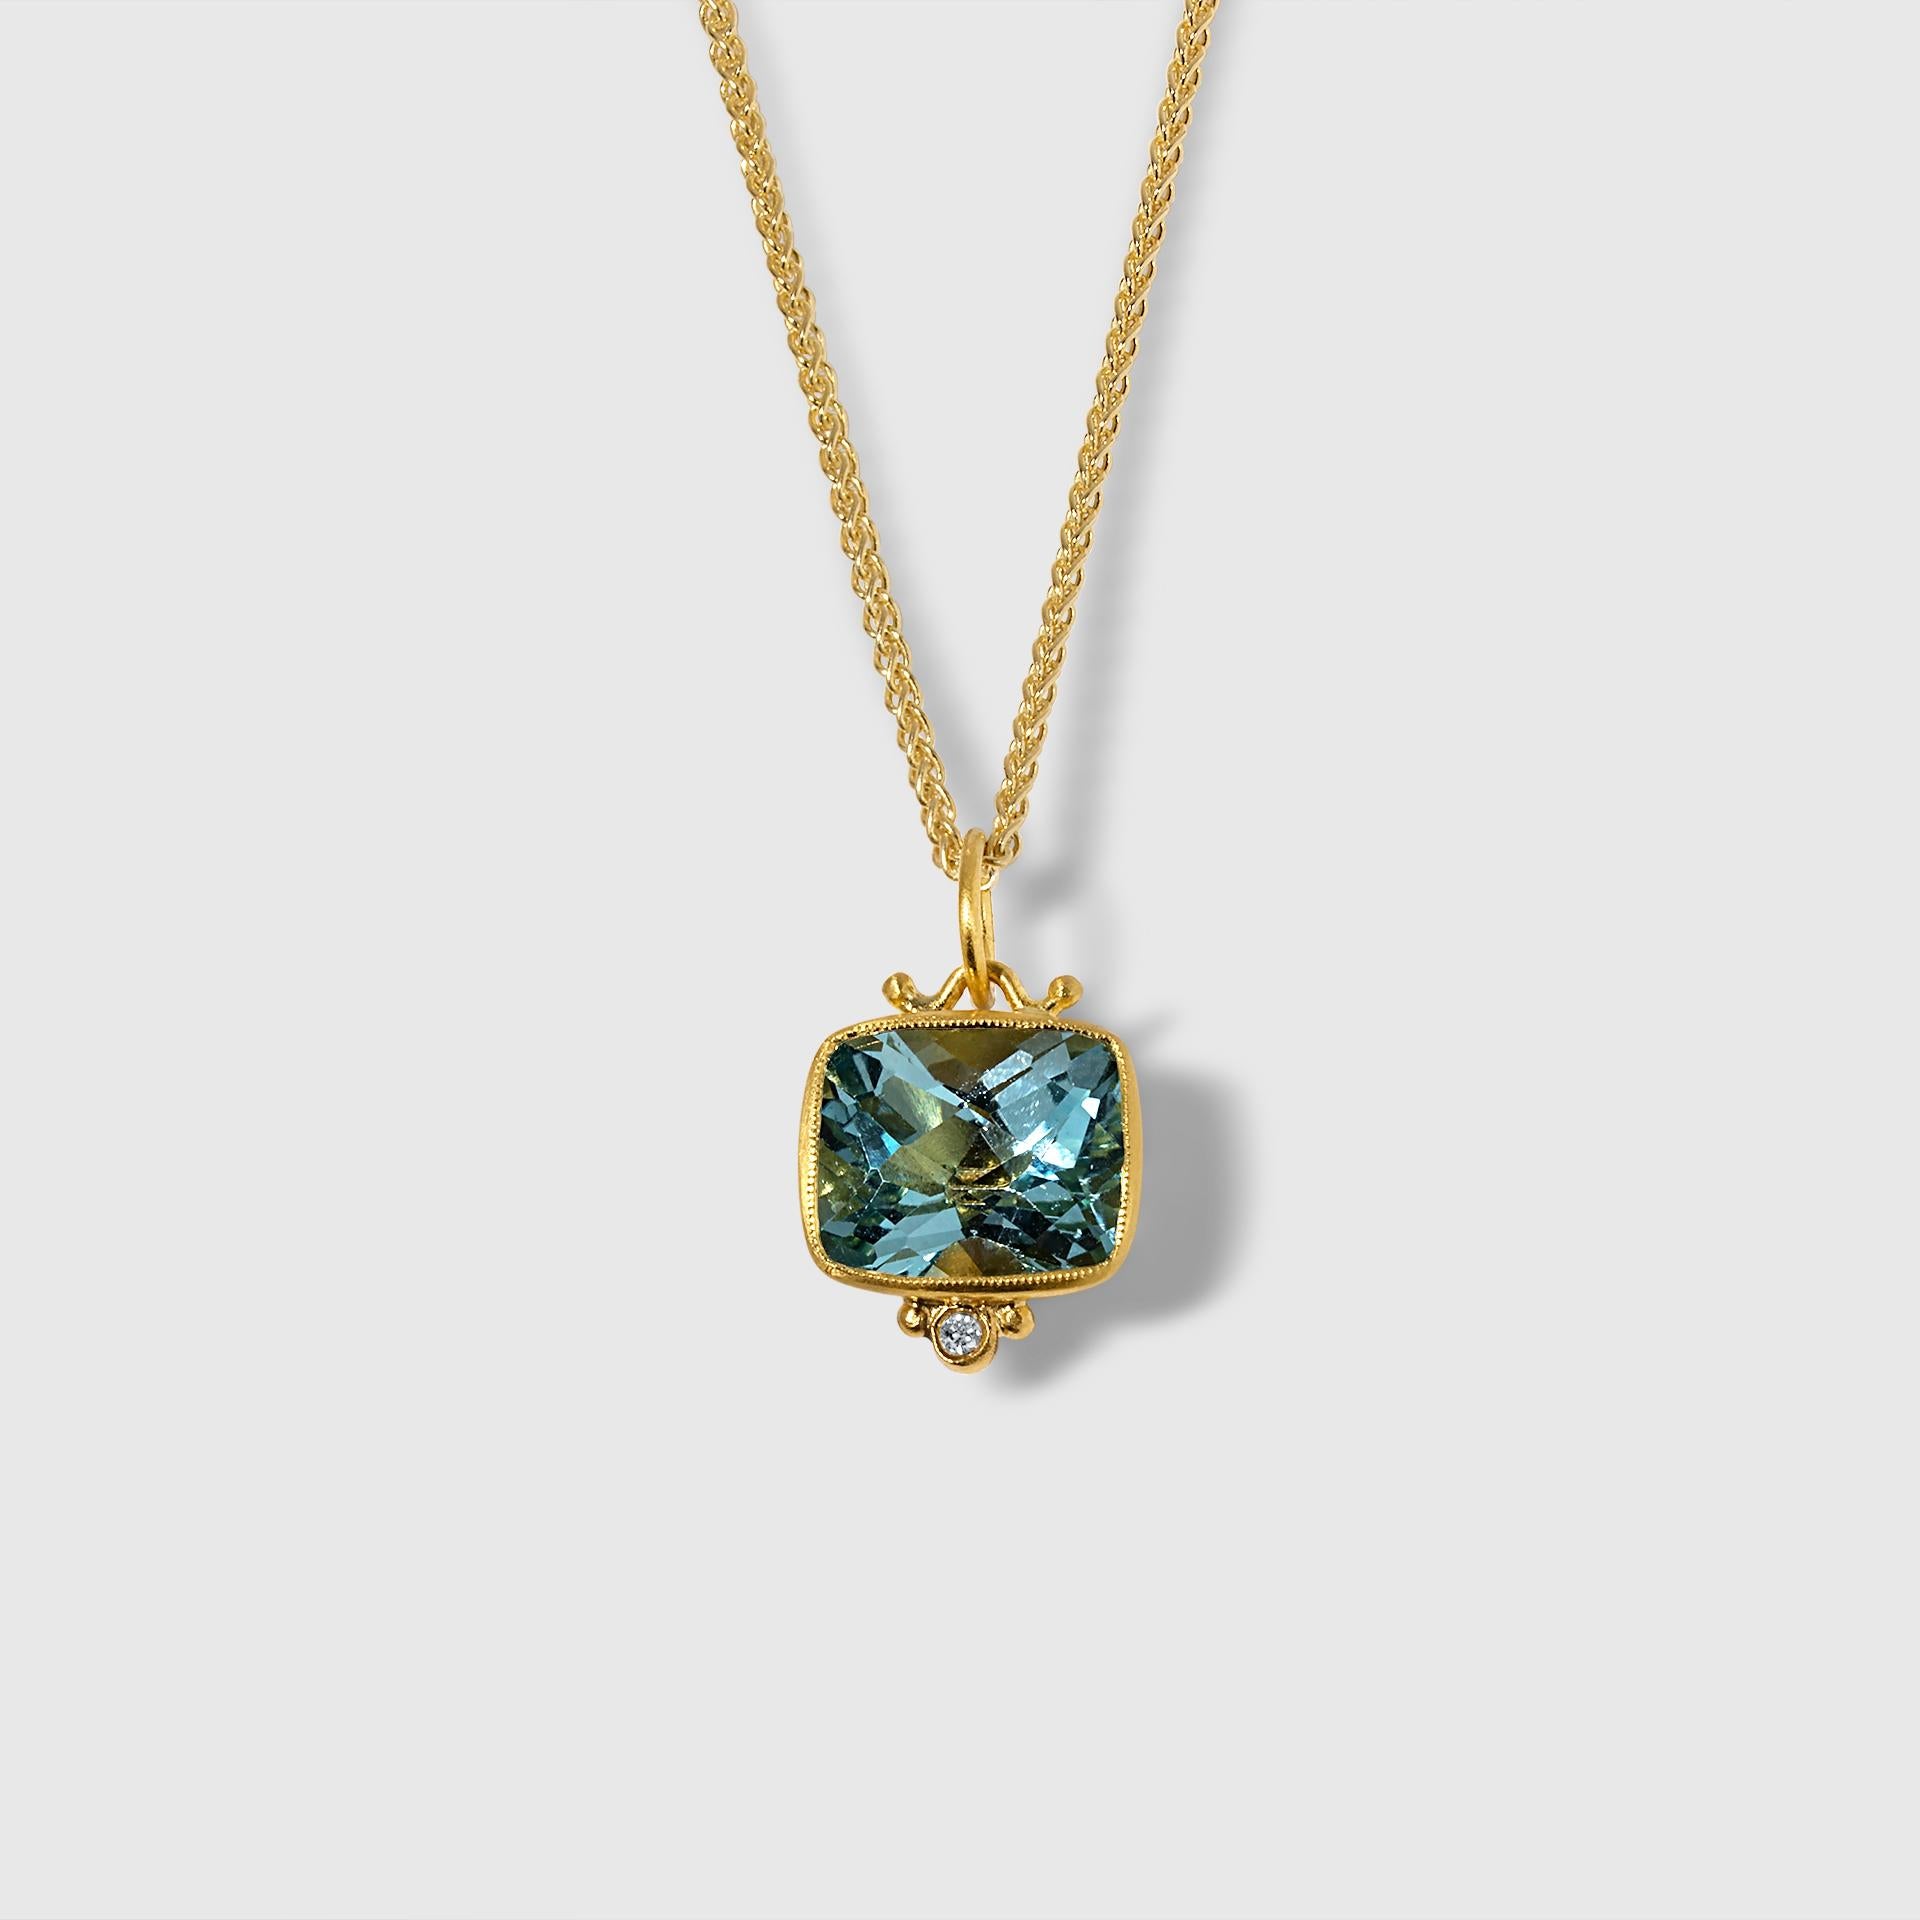 Faceted Checkerboard Bright Blue Topaz Pendant, 24K Solid Gold Necklace Pendant In New Condition For Sale In Bozeman, MT